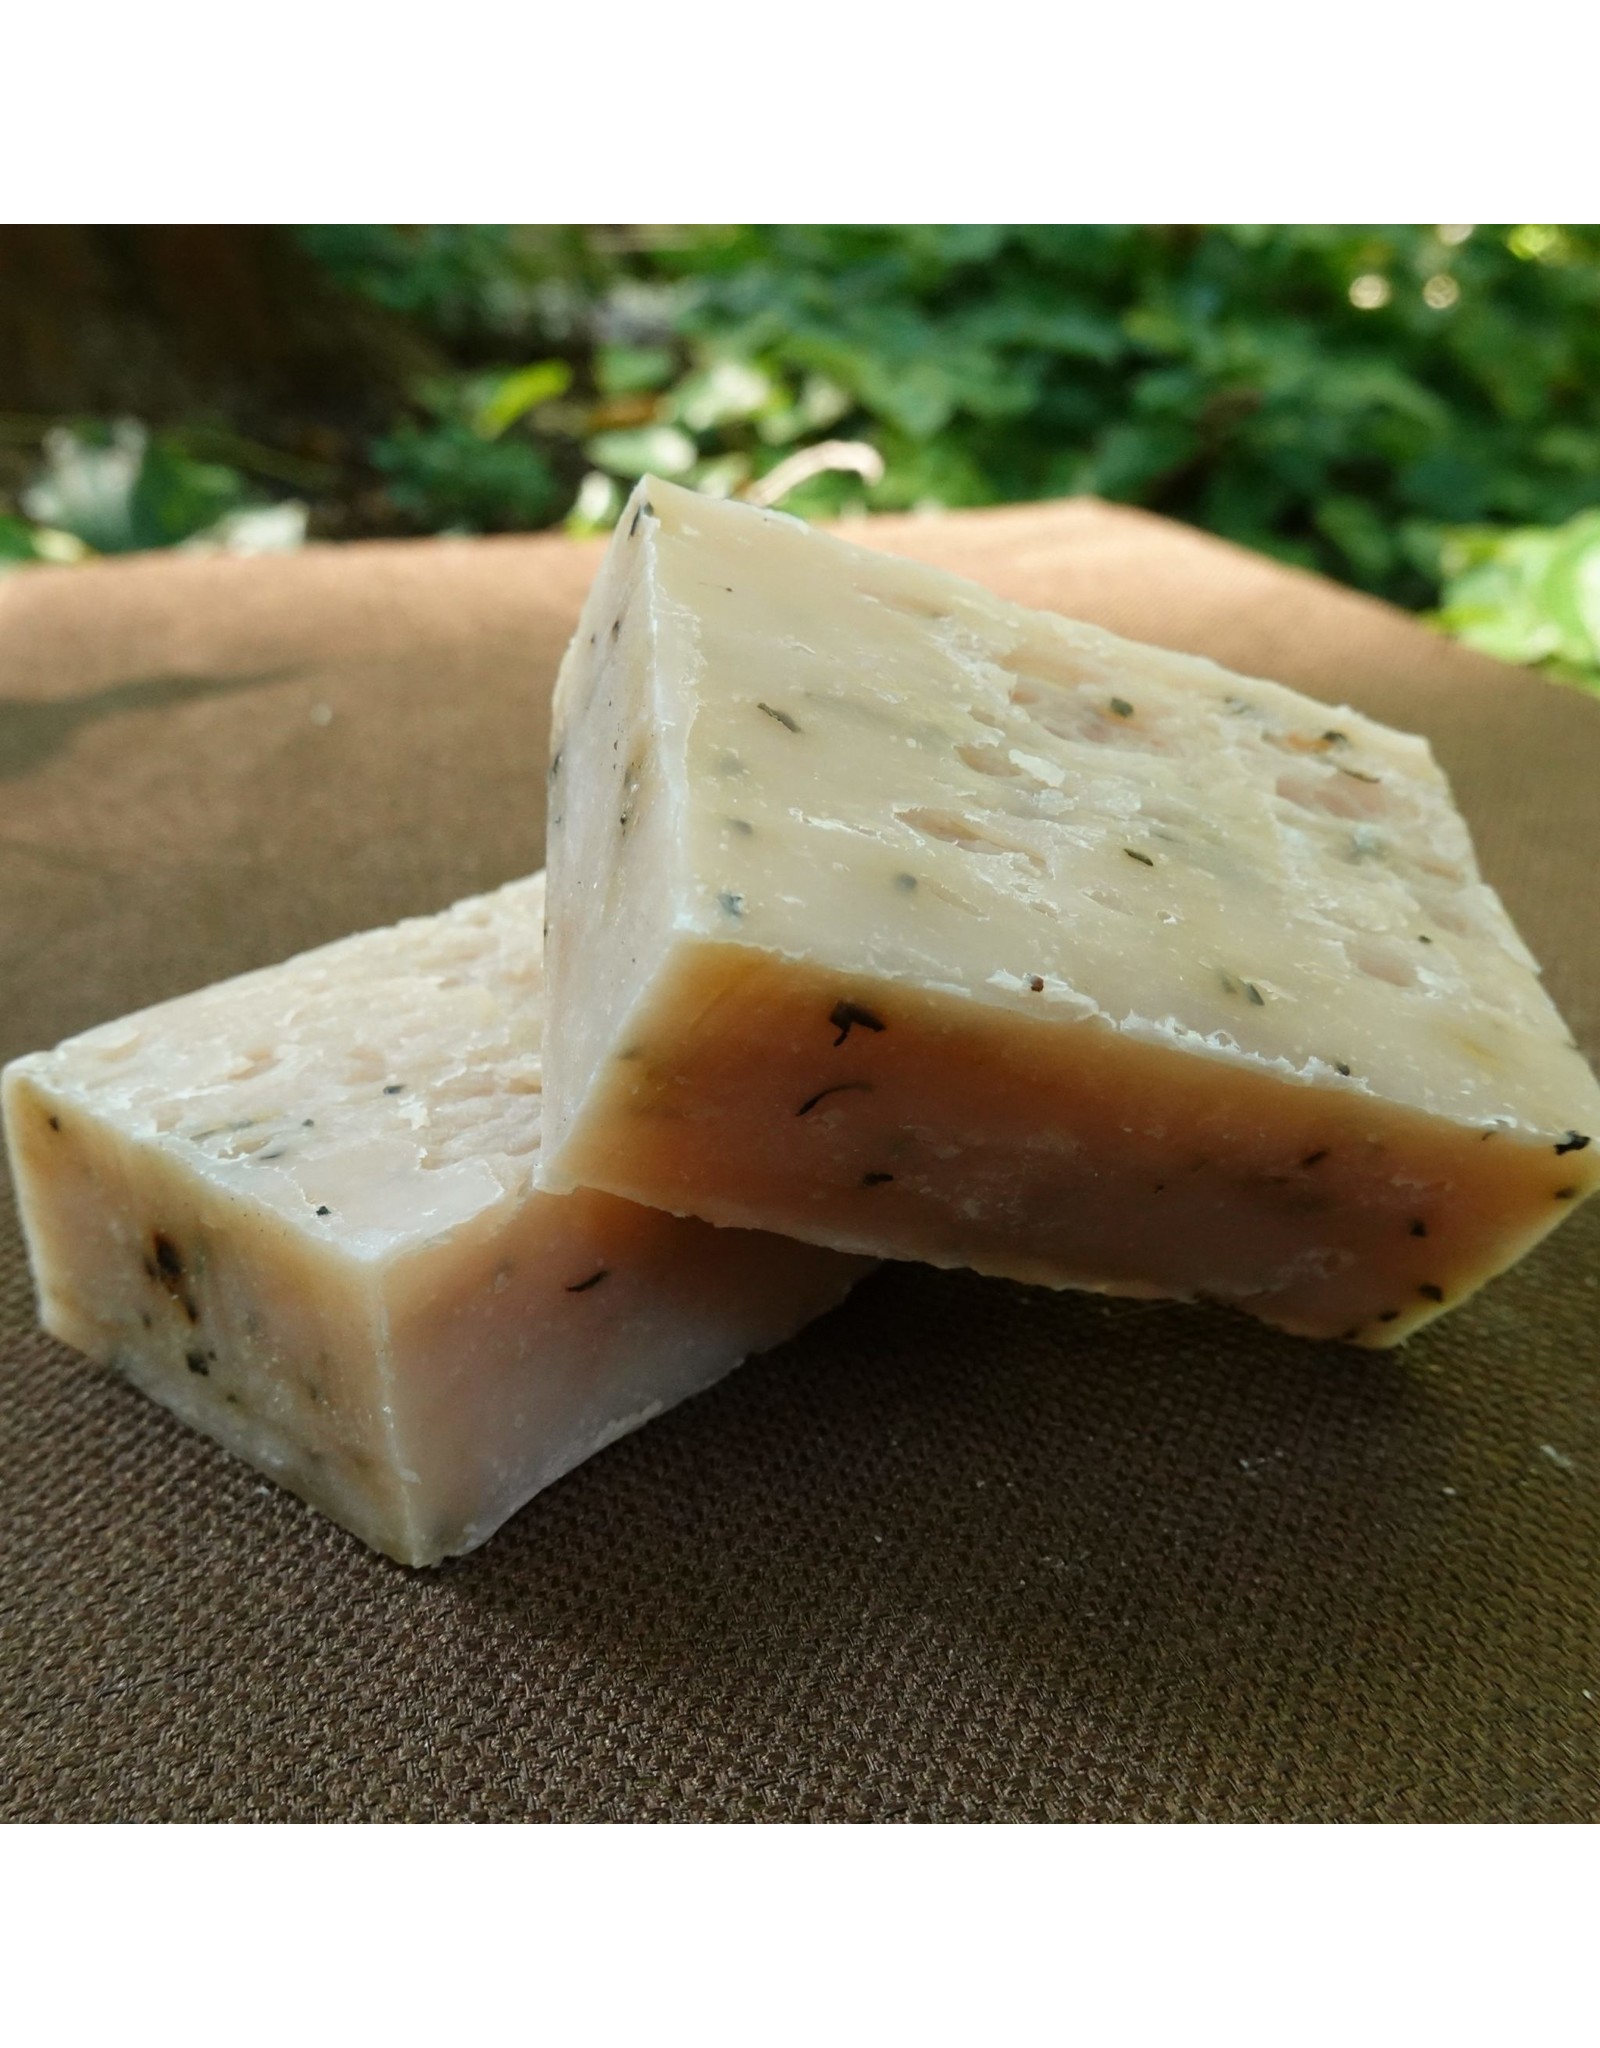 Trade roots Oak Lane Soap, Rosemary Peppermint, Local